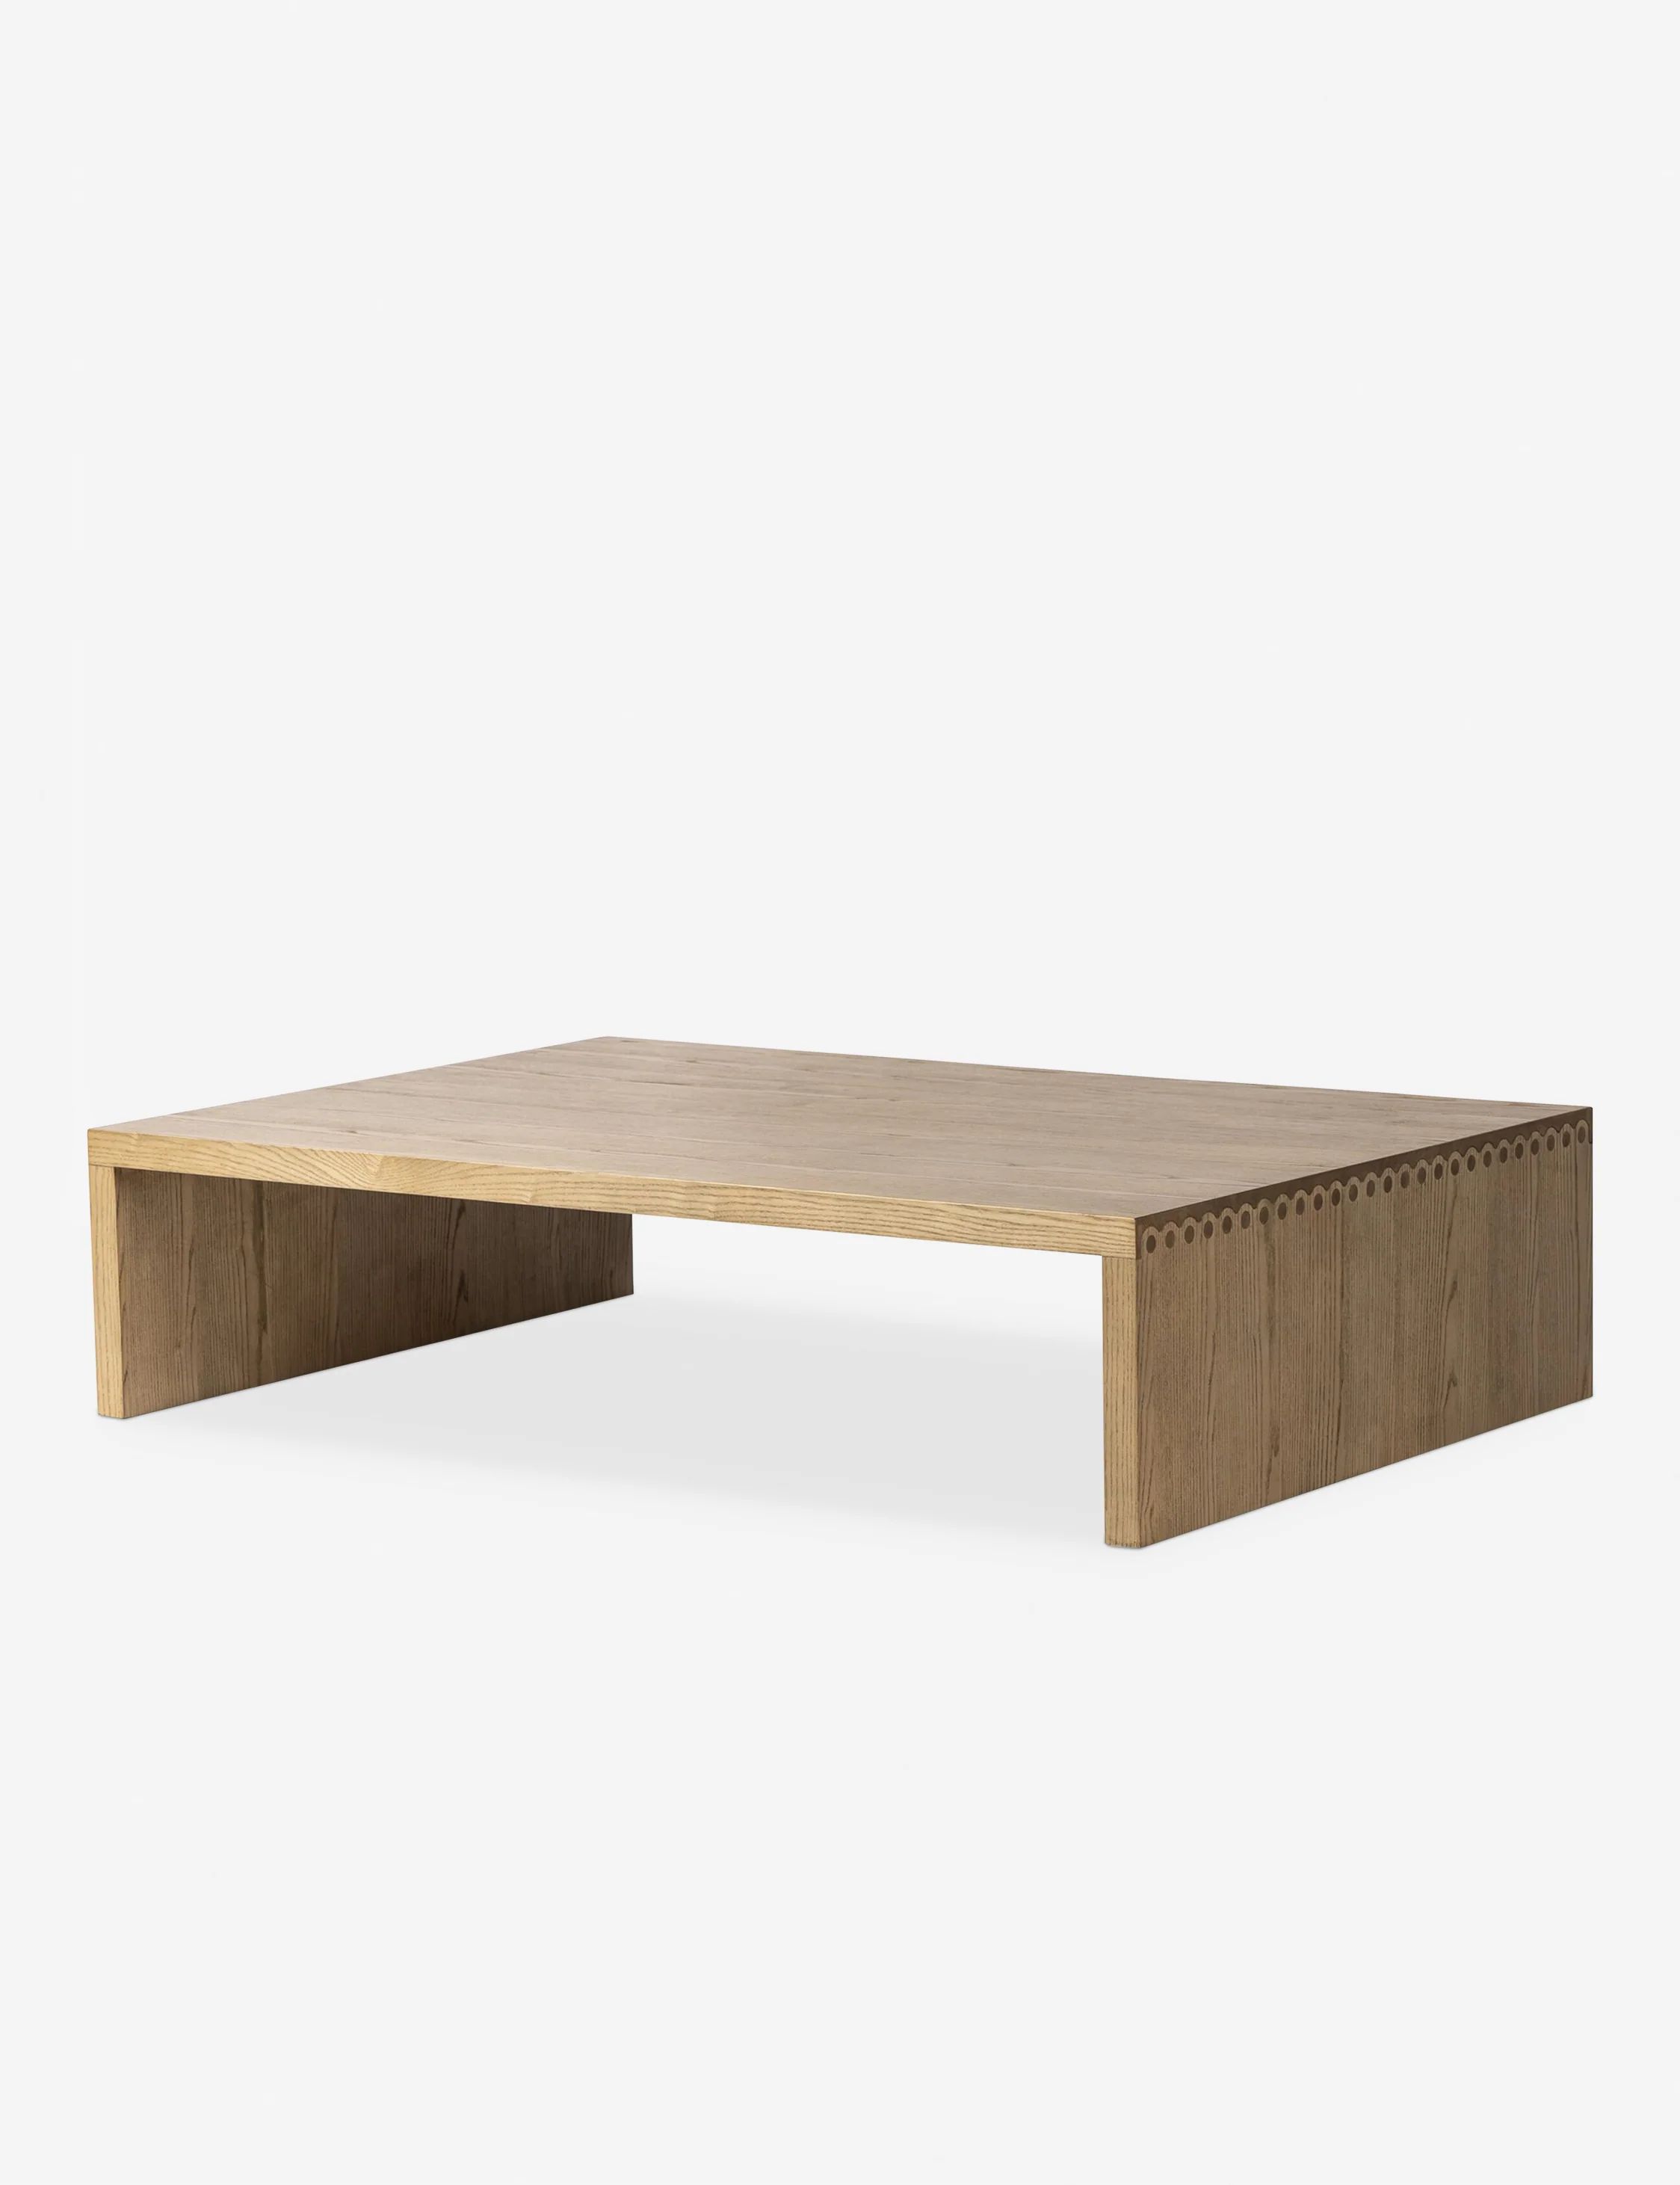 Hathaway Coffee Table by Amber Lewis x Four Hands | Lulu and Georgia 